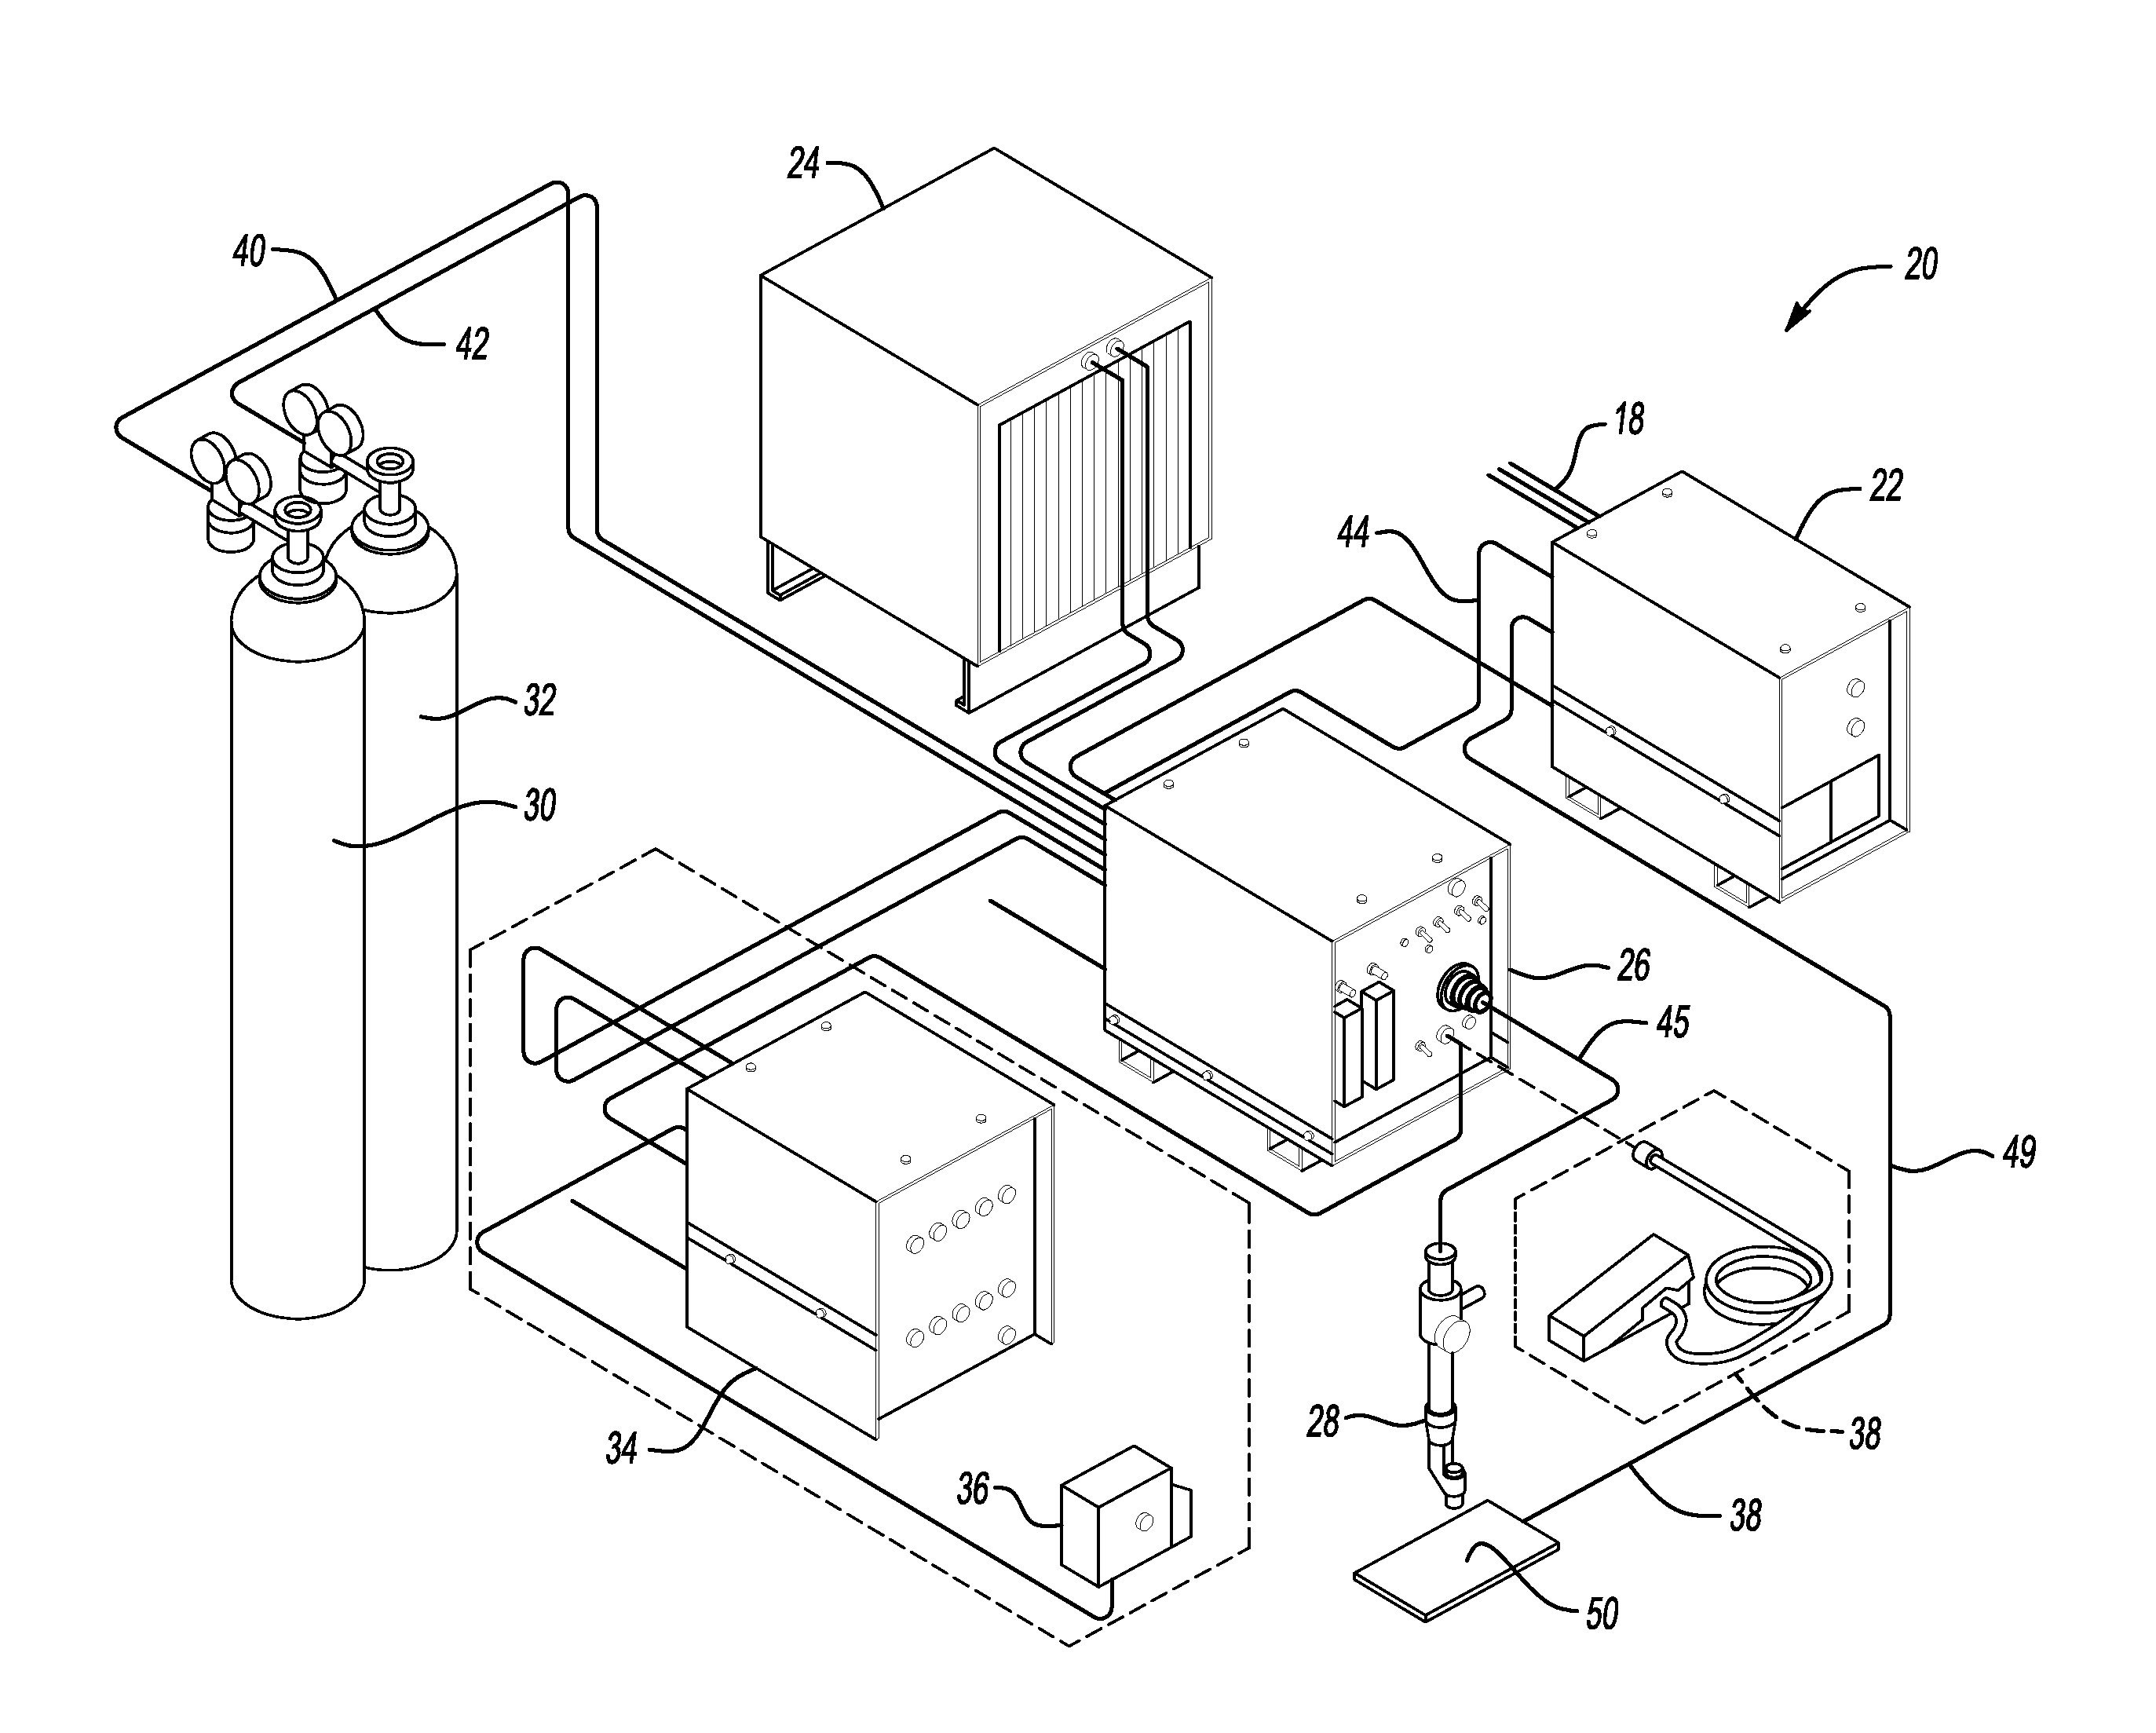 Method of converting a gas tungsten arc welding system to a plasma welding system